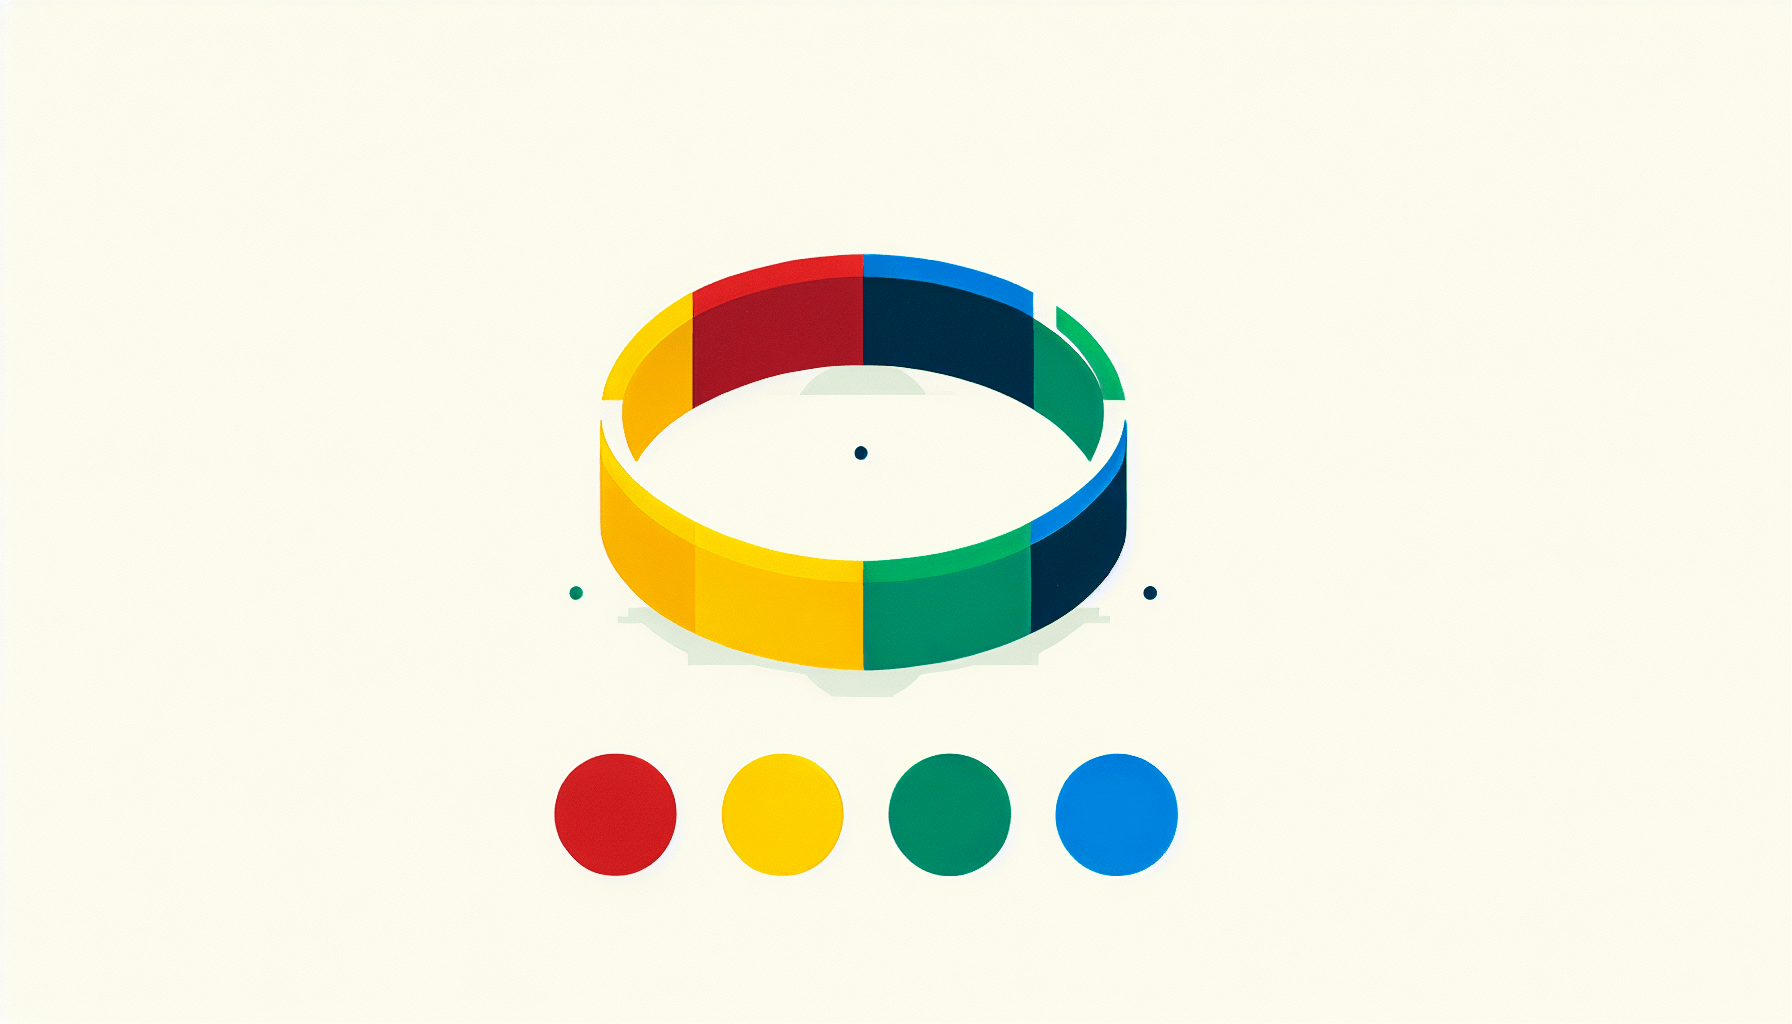 Wedding ring in flat illustration style and white background, red #f47574, green #88c7a8, yellow #fcc44b, and blue #645bc8 colors.